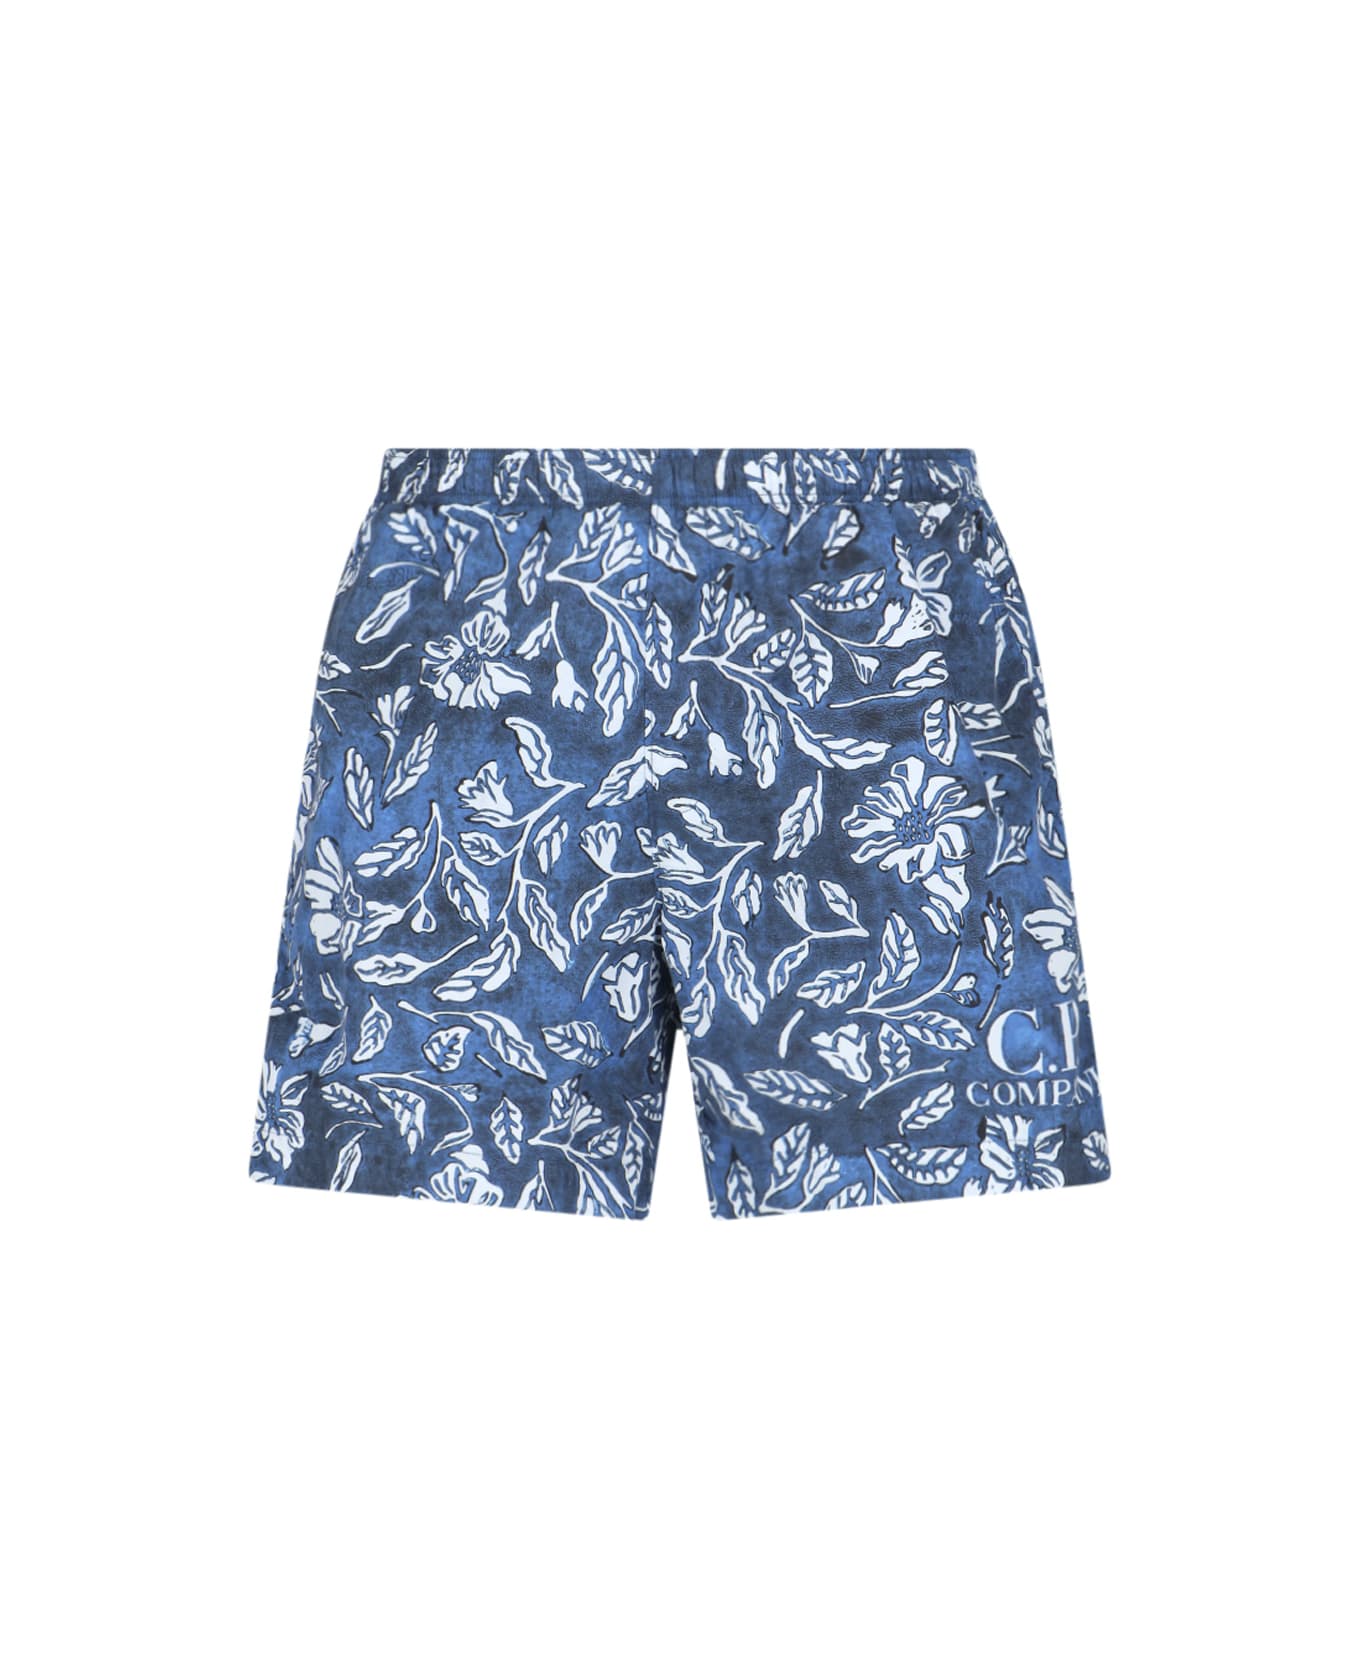 C.P. Company Floral Print Swimming Shorts - Medieval Blue